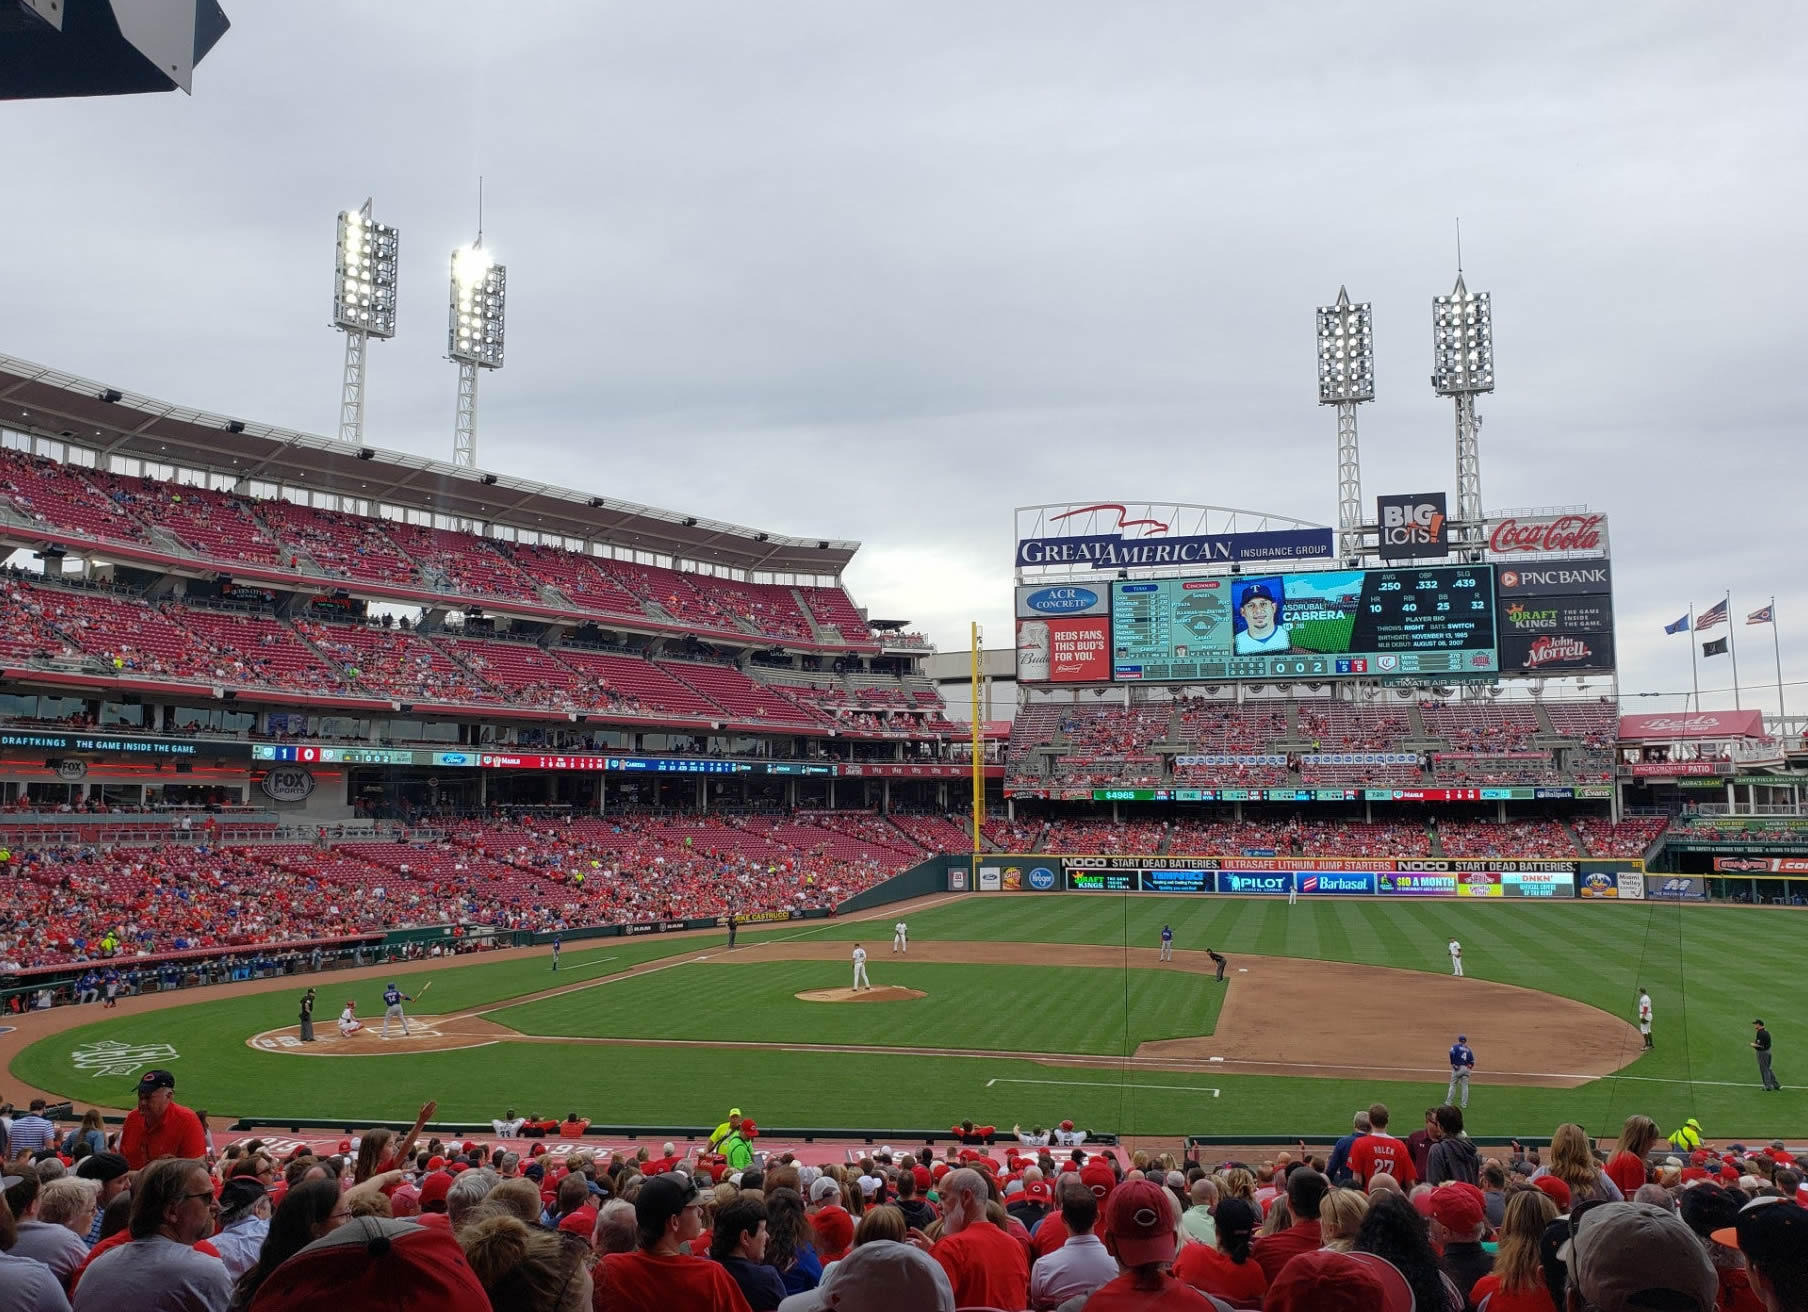 Great American Ball Park - Cincinnati Reds is one of the very best